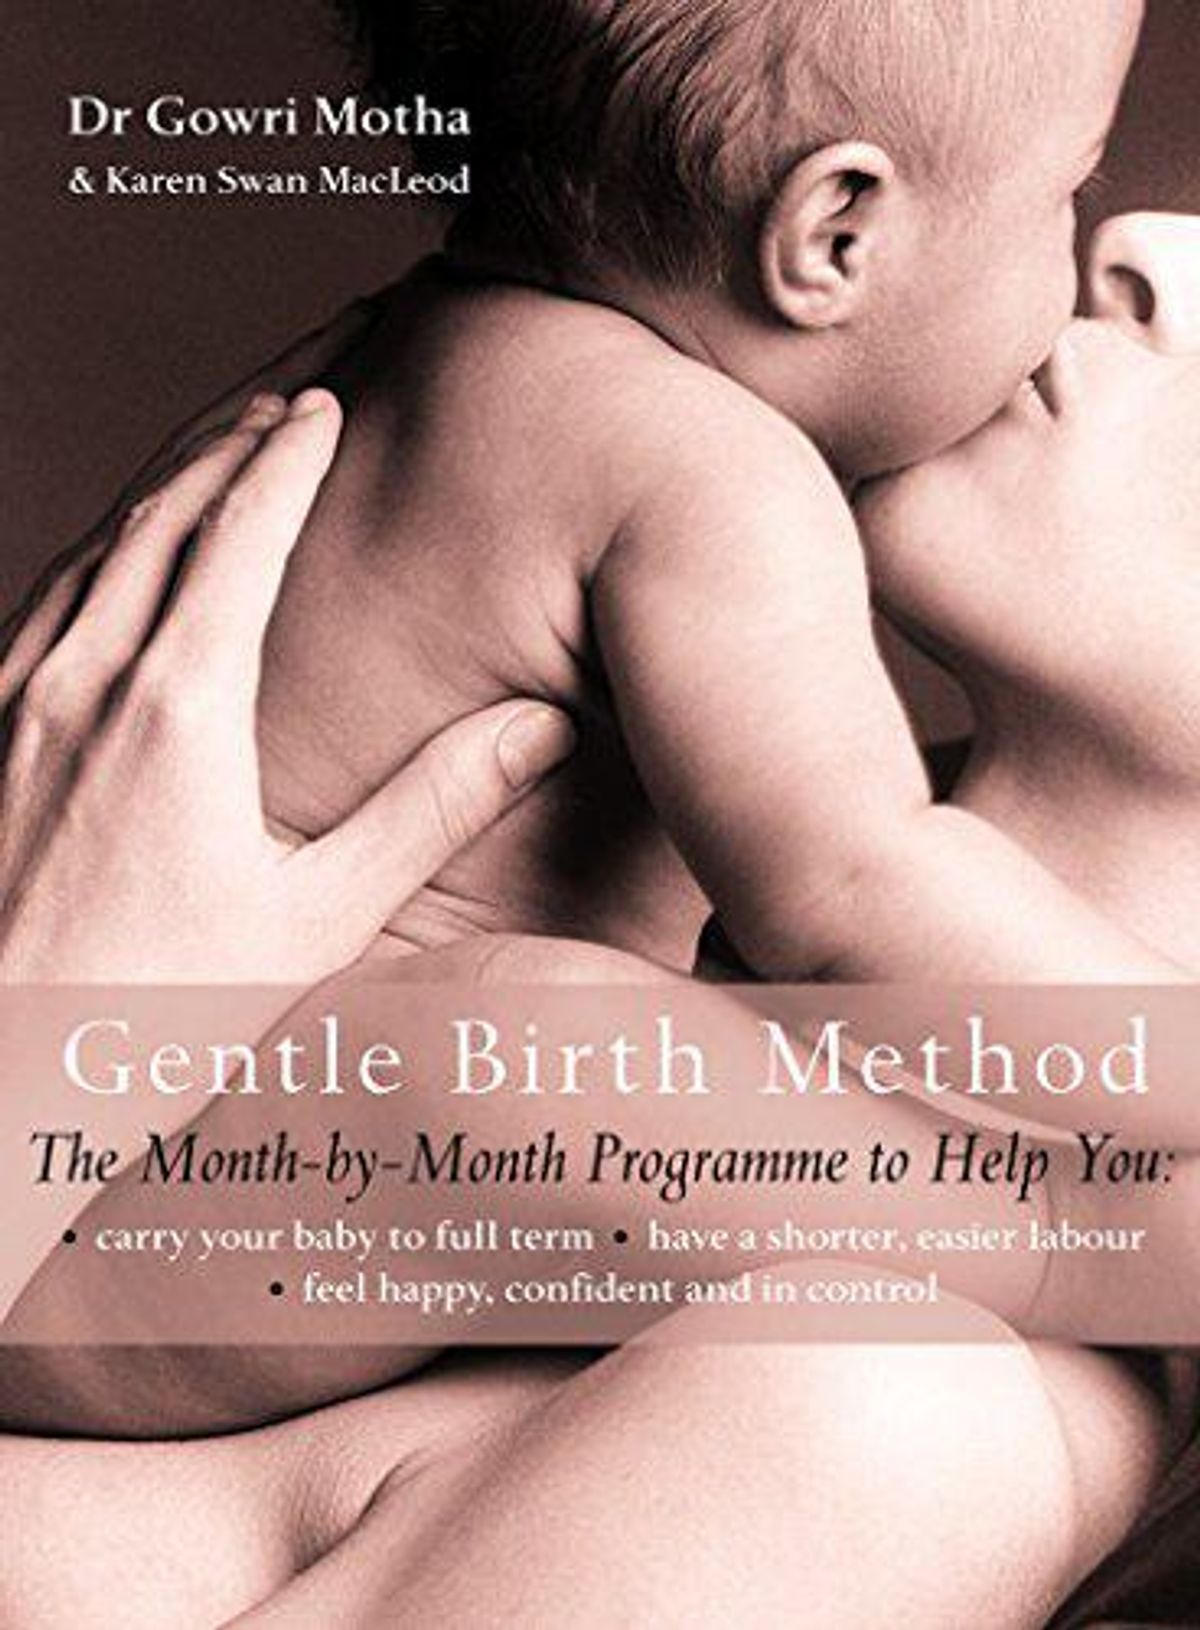 dr. gowri motha and karen swan macLeod the gentle birth method the month by month jeyarani way programme